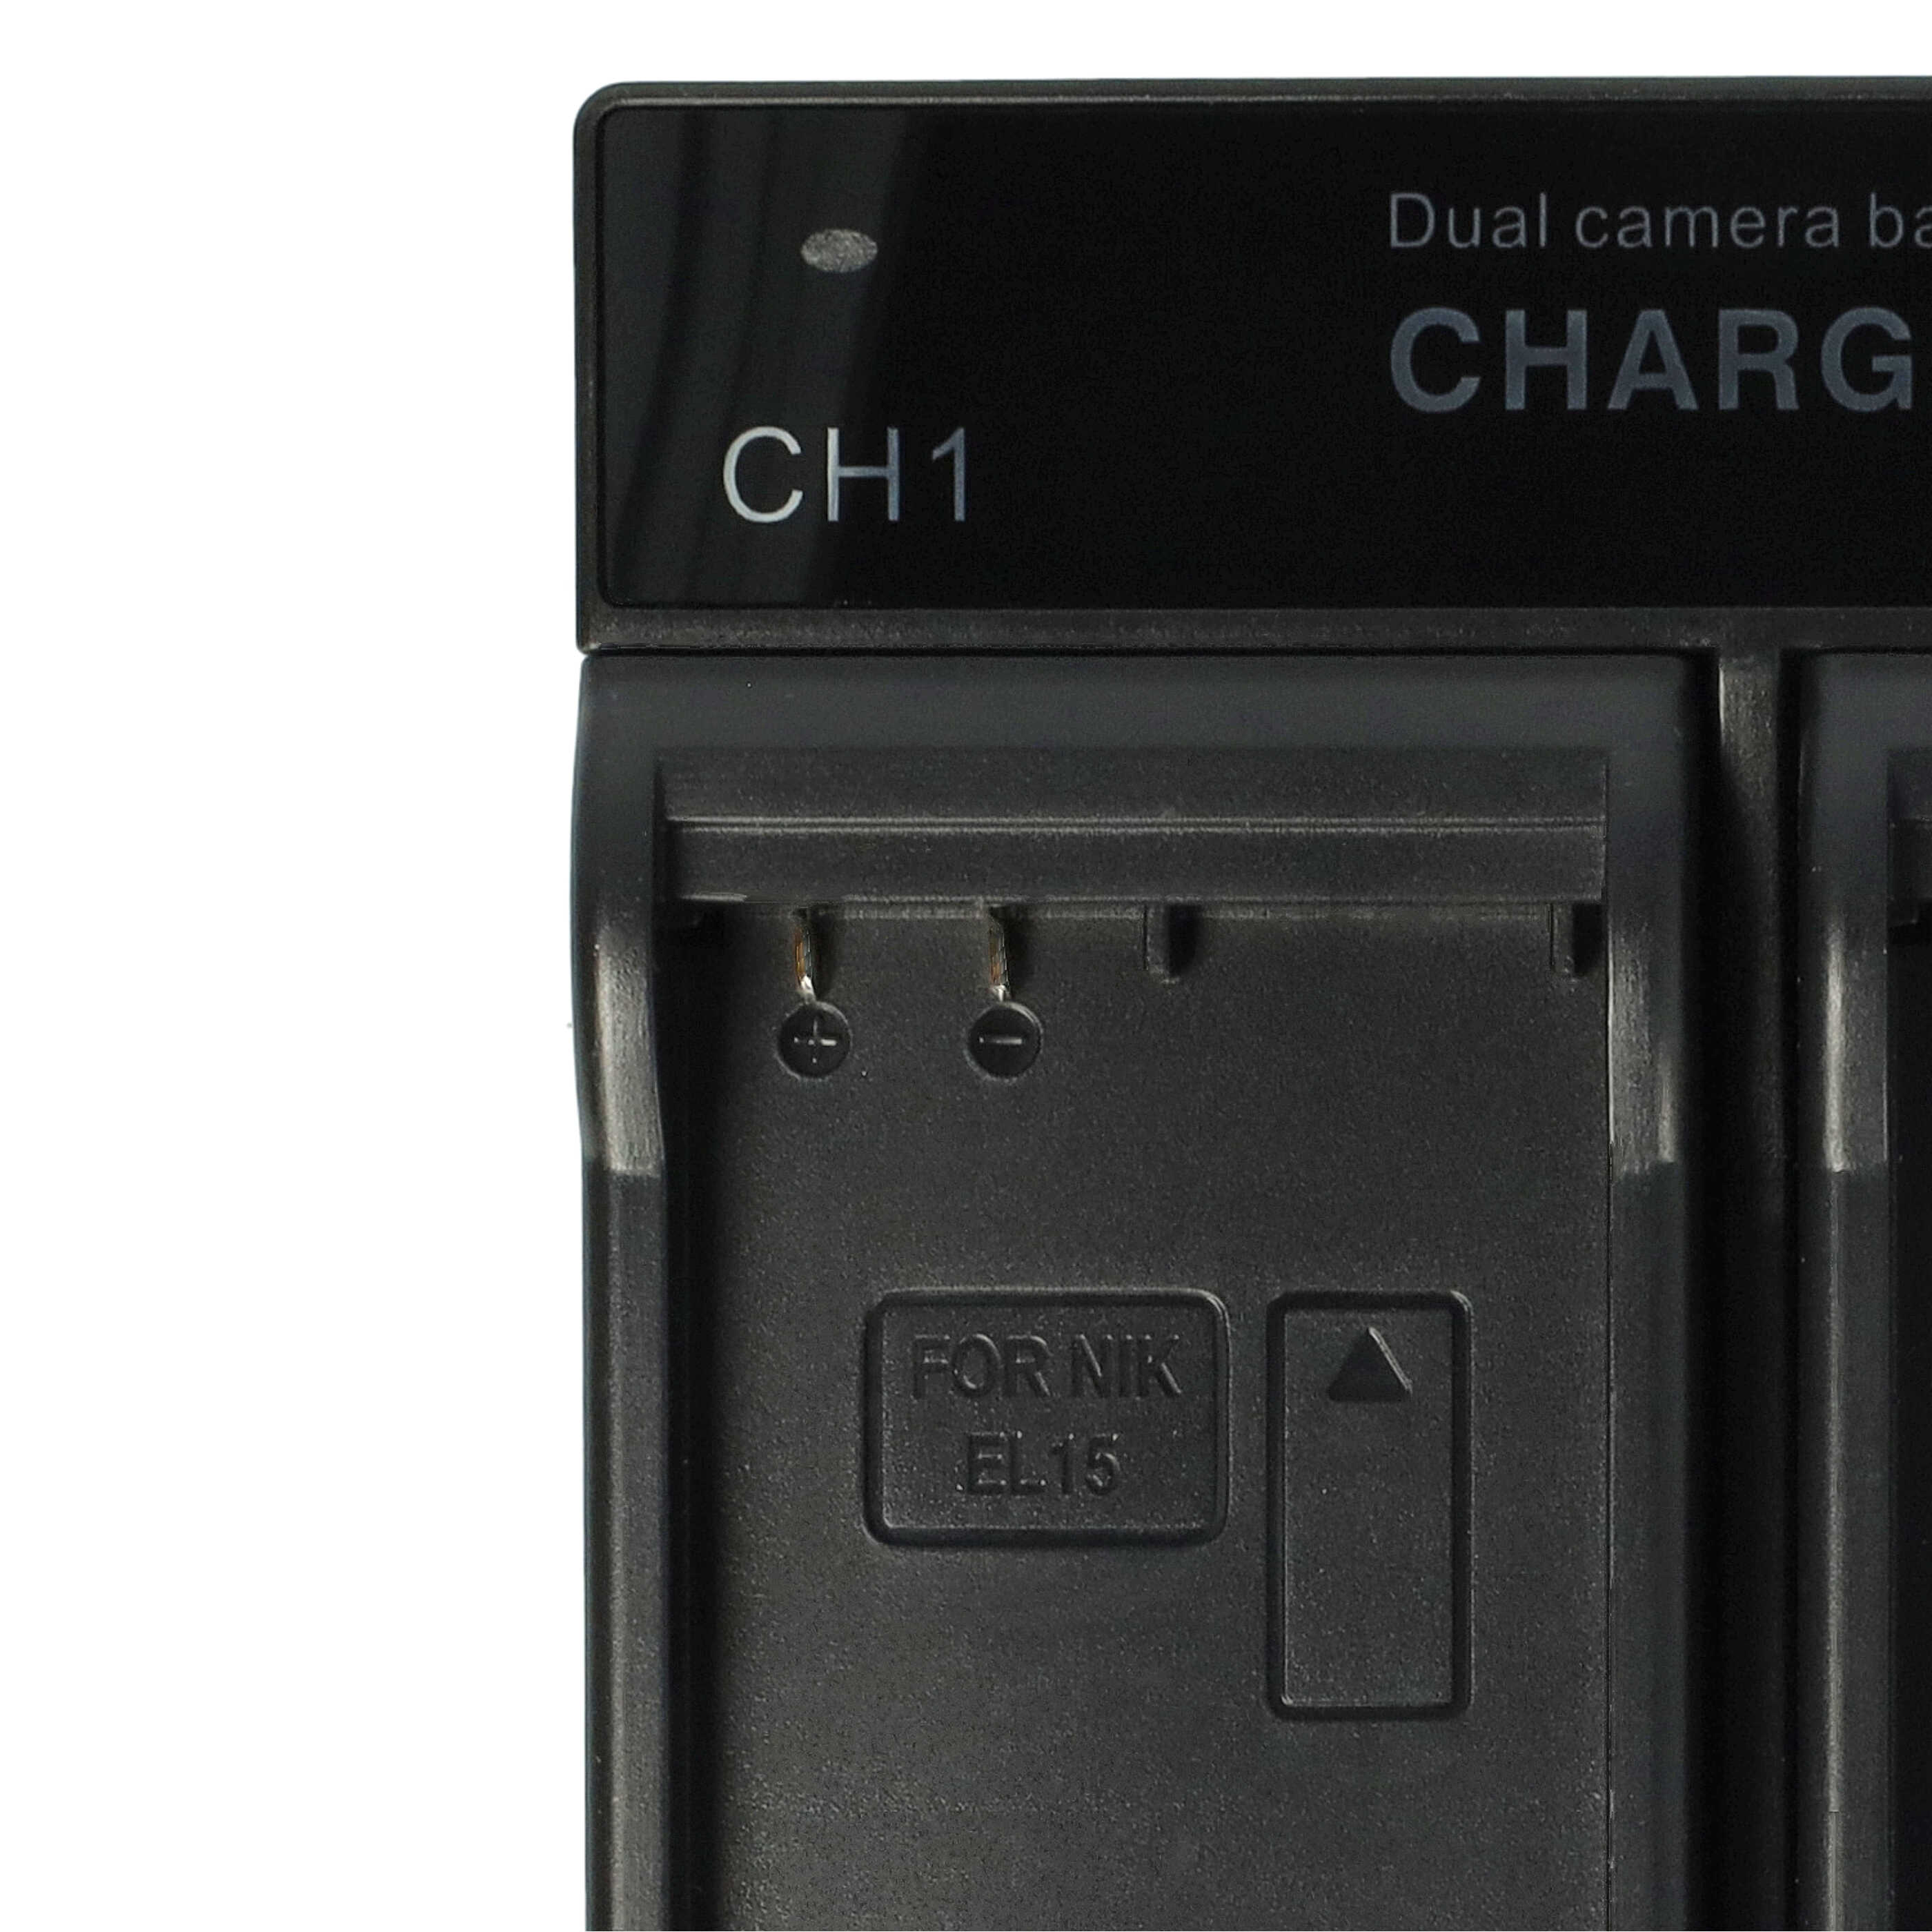 Battery Charger suitable for Coolpix D750 Camera etc. - 0.5 / 0.9 A, 4.2/8.4 V